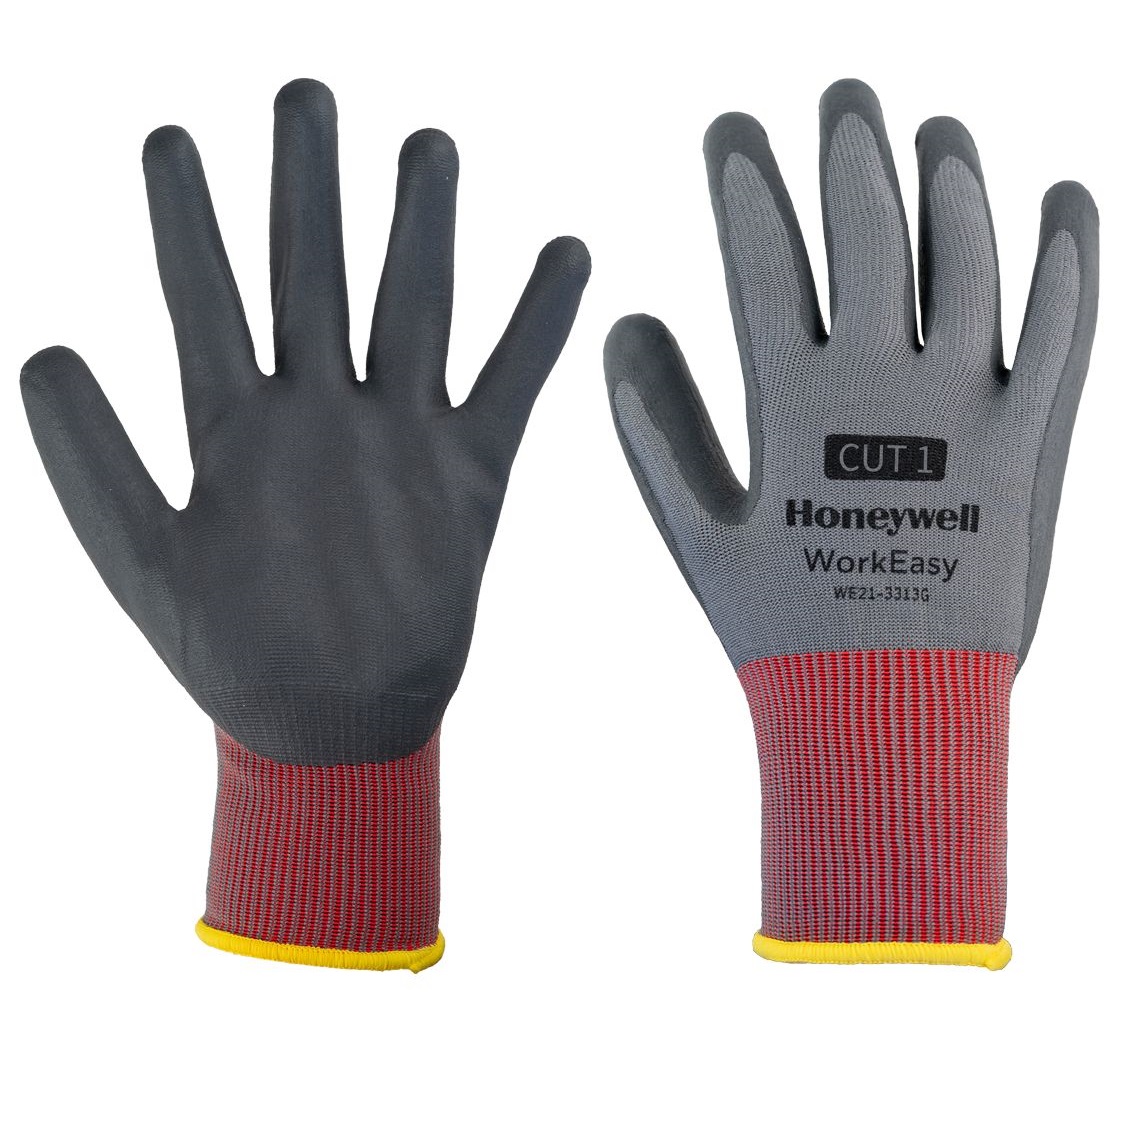 Manusi de protectie imersate partial pe suport tricot - Honeywell - WorkEasy nitril